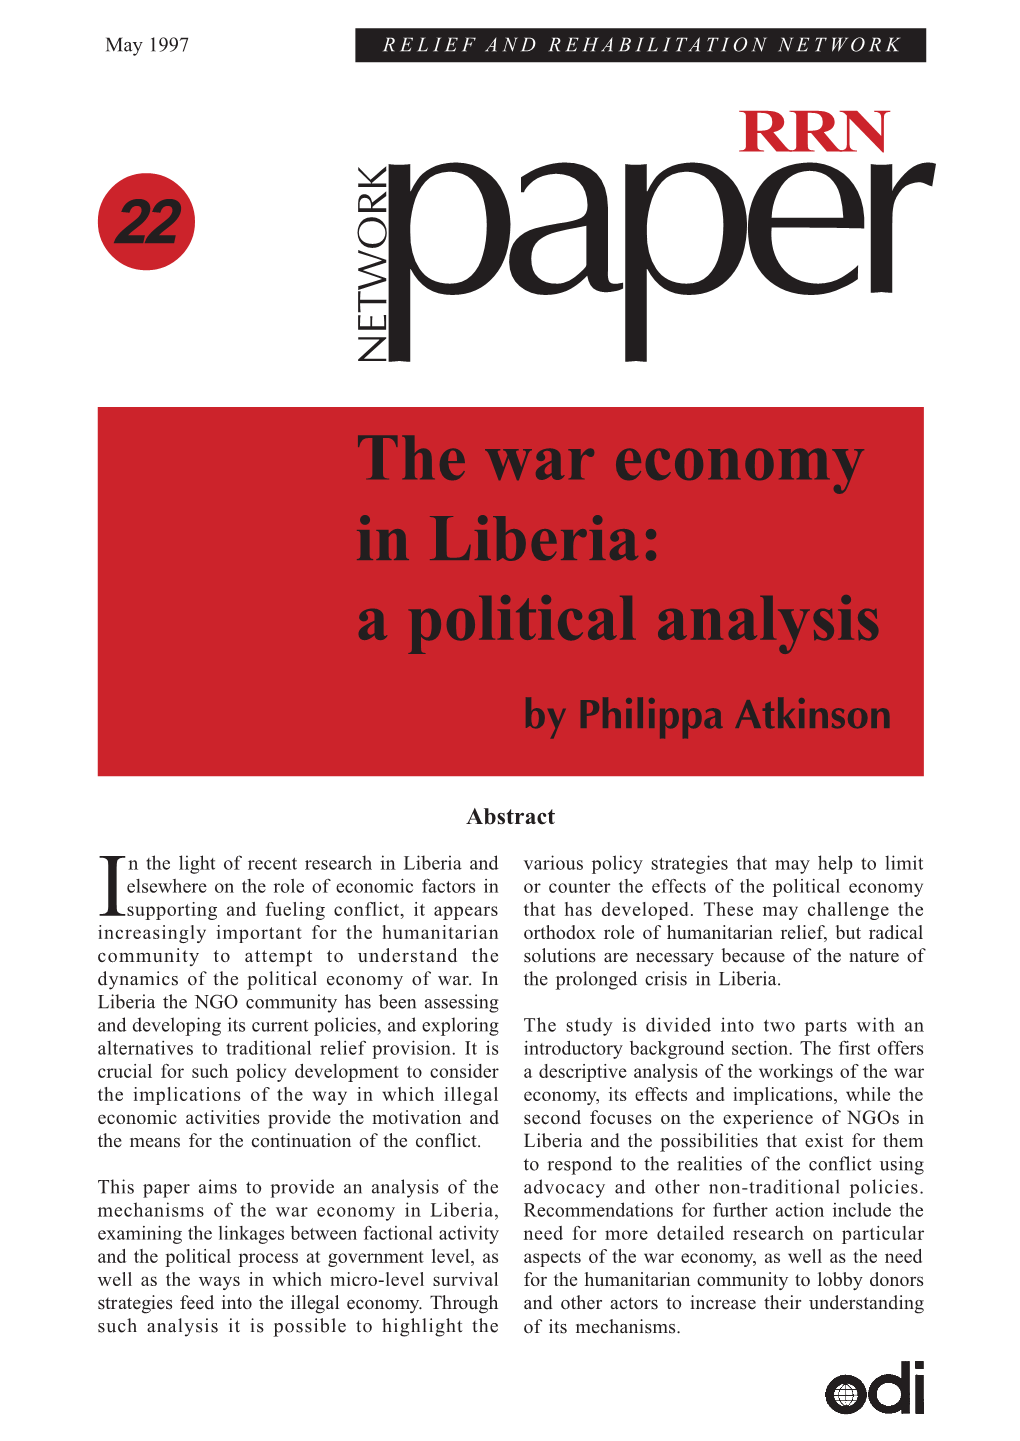 The War Economy in Liberia: a Political Analysis by Philippa Atkinson